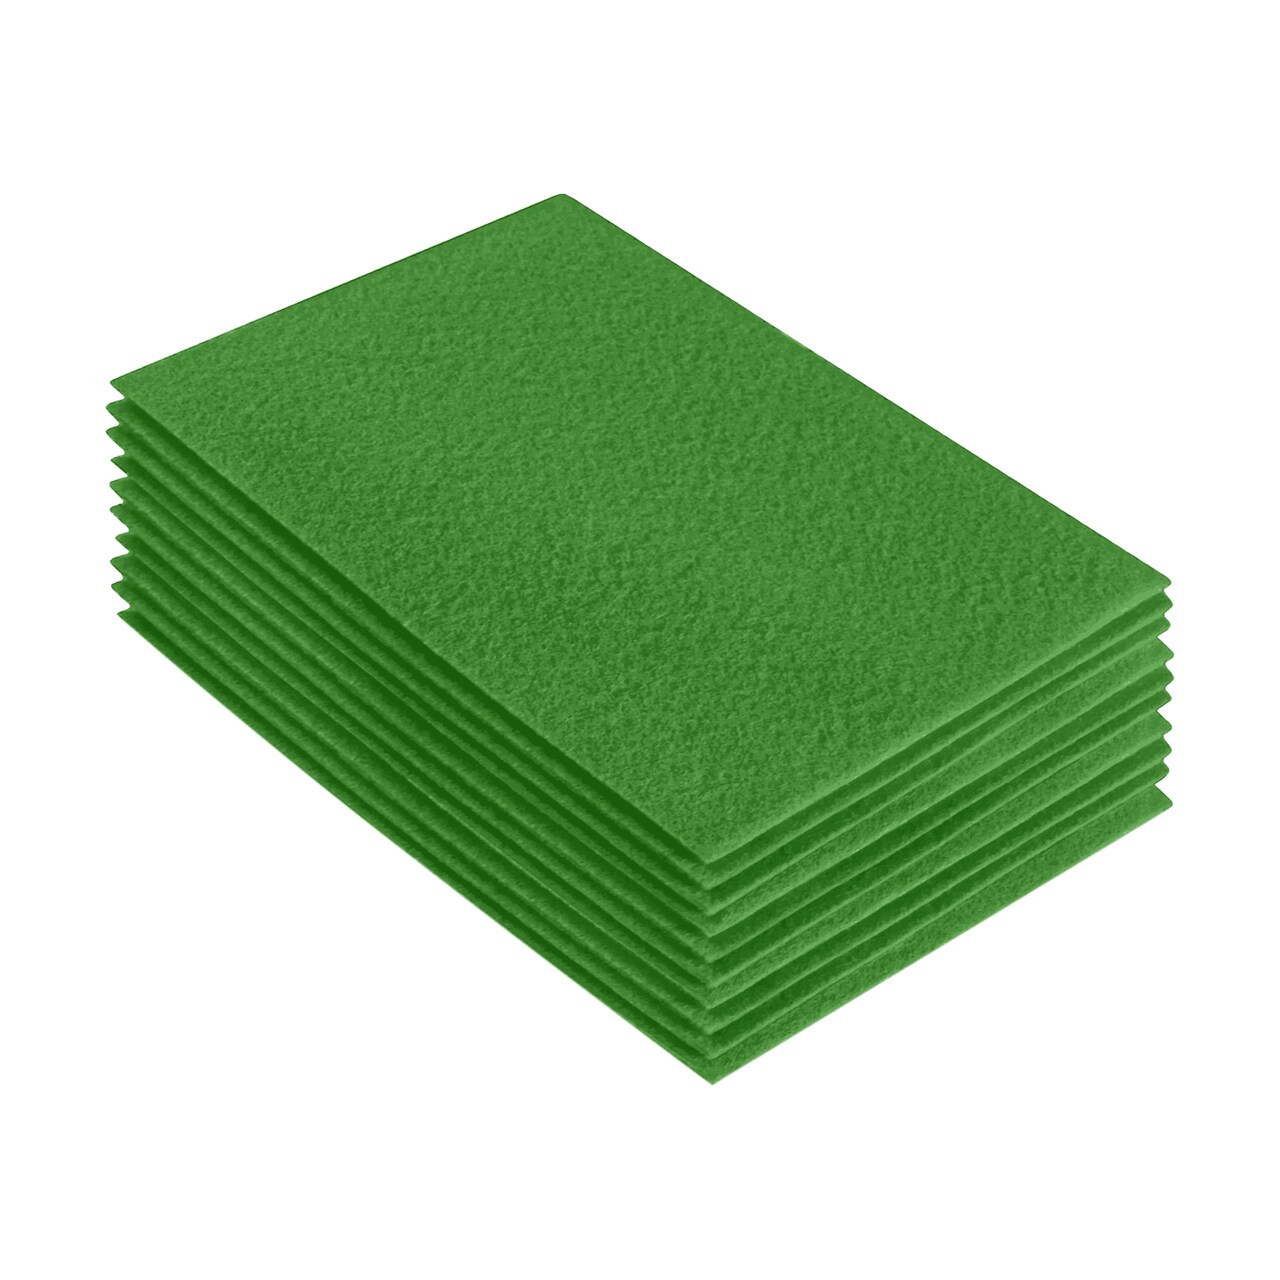 FabricLA Acrylic Felt Sheets for Crafts - Precut 9 X 12 Inches (20 cm X  30 cm) Felt Squares - Use Felt Fabric Craft Sheets for DIY, Hobby, Costume,  and Decoration, Green